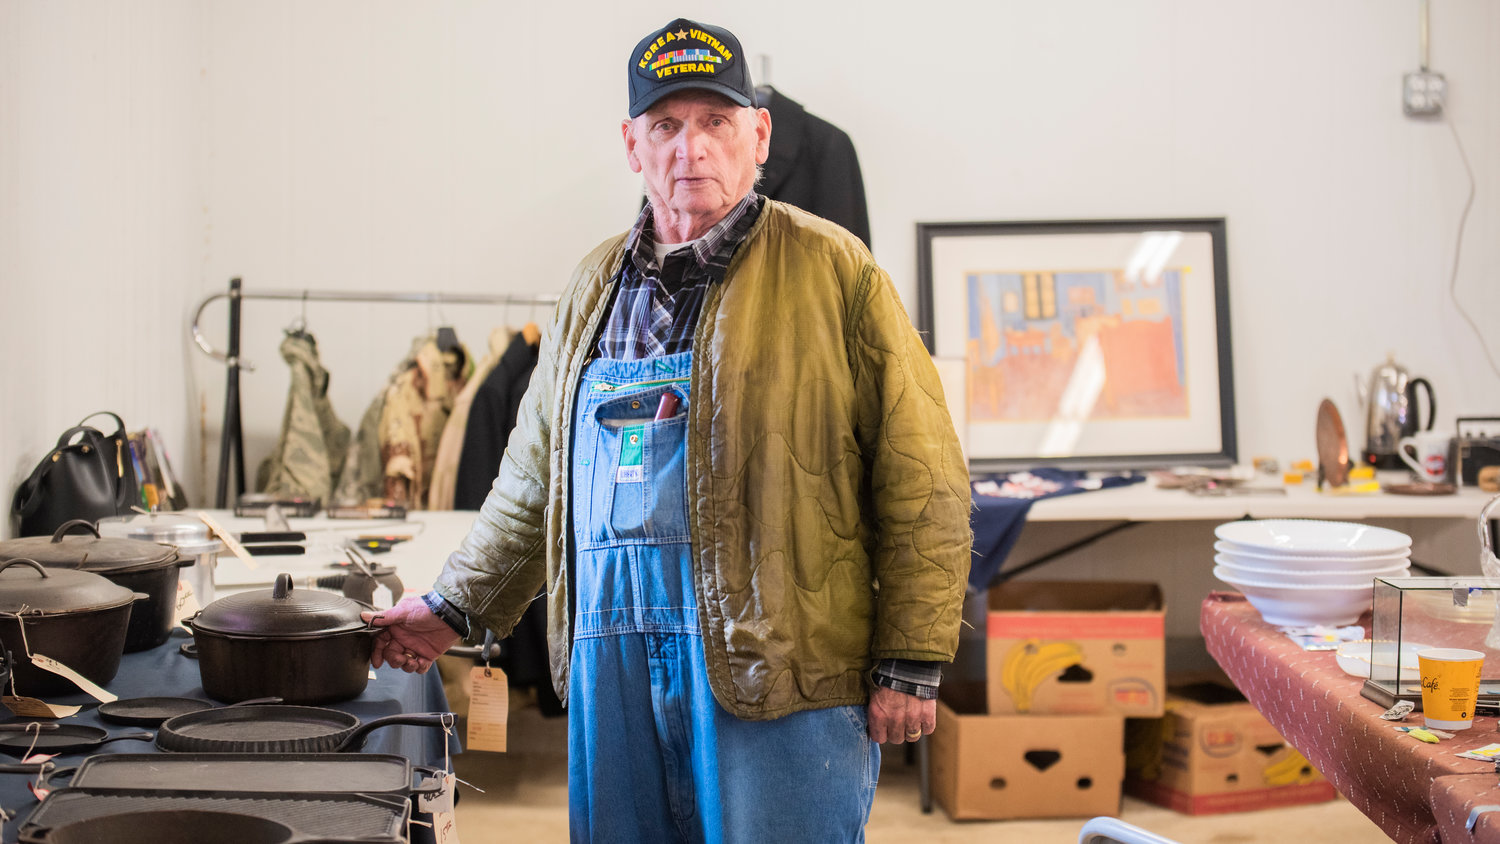 Burt Illig, 88, stands between fellow salesmen John Sheilds and Vern Webb during the Spring Community Garage Sale Saturday morning in Centralia. Illig, a Navy Veteran, specializes in cast iron cookware.